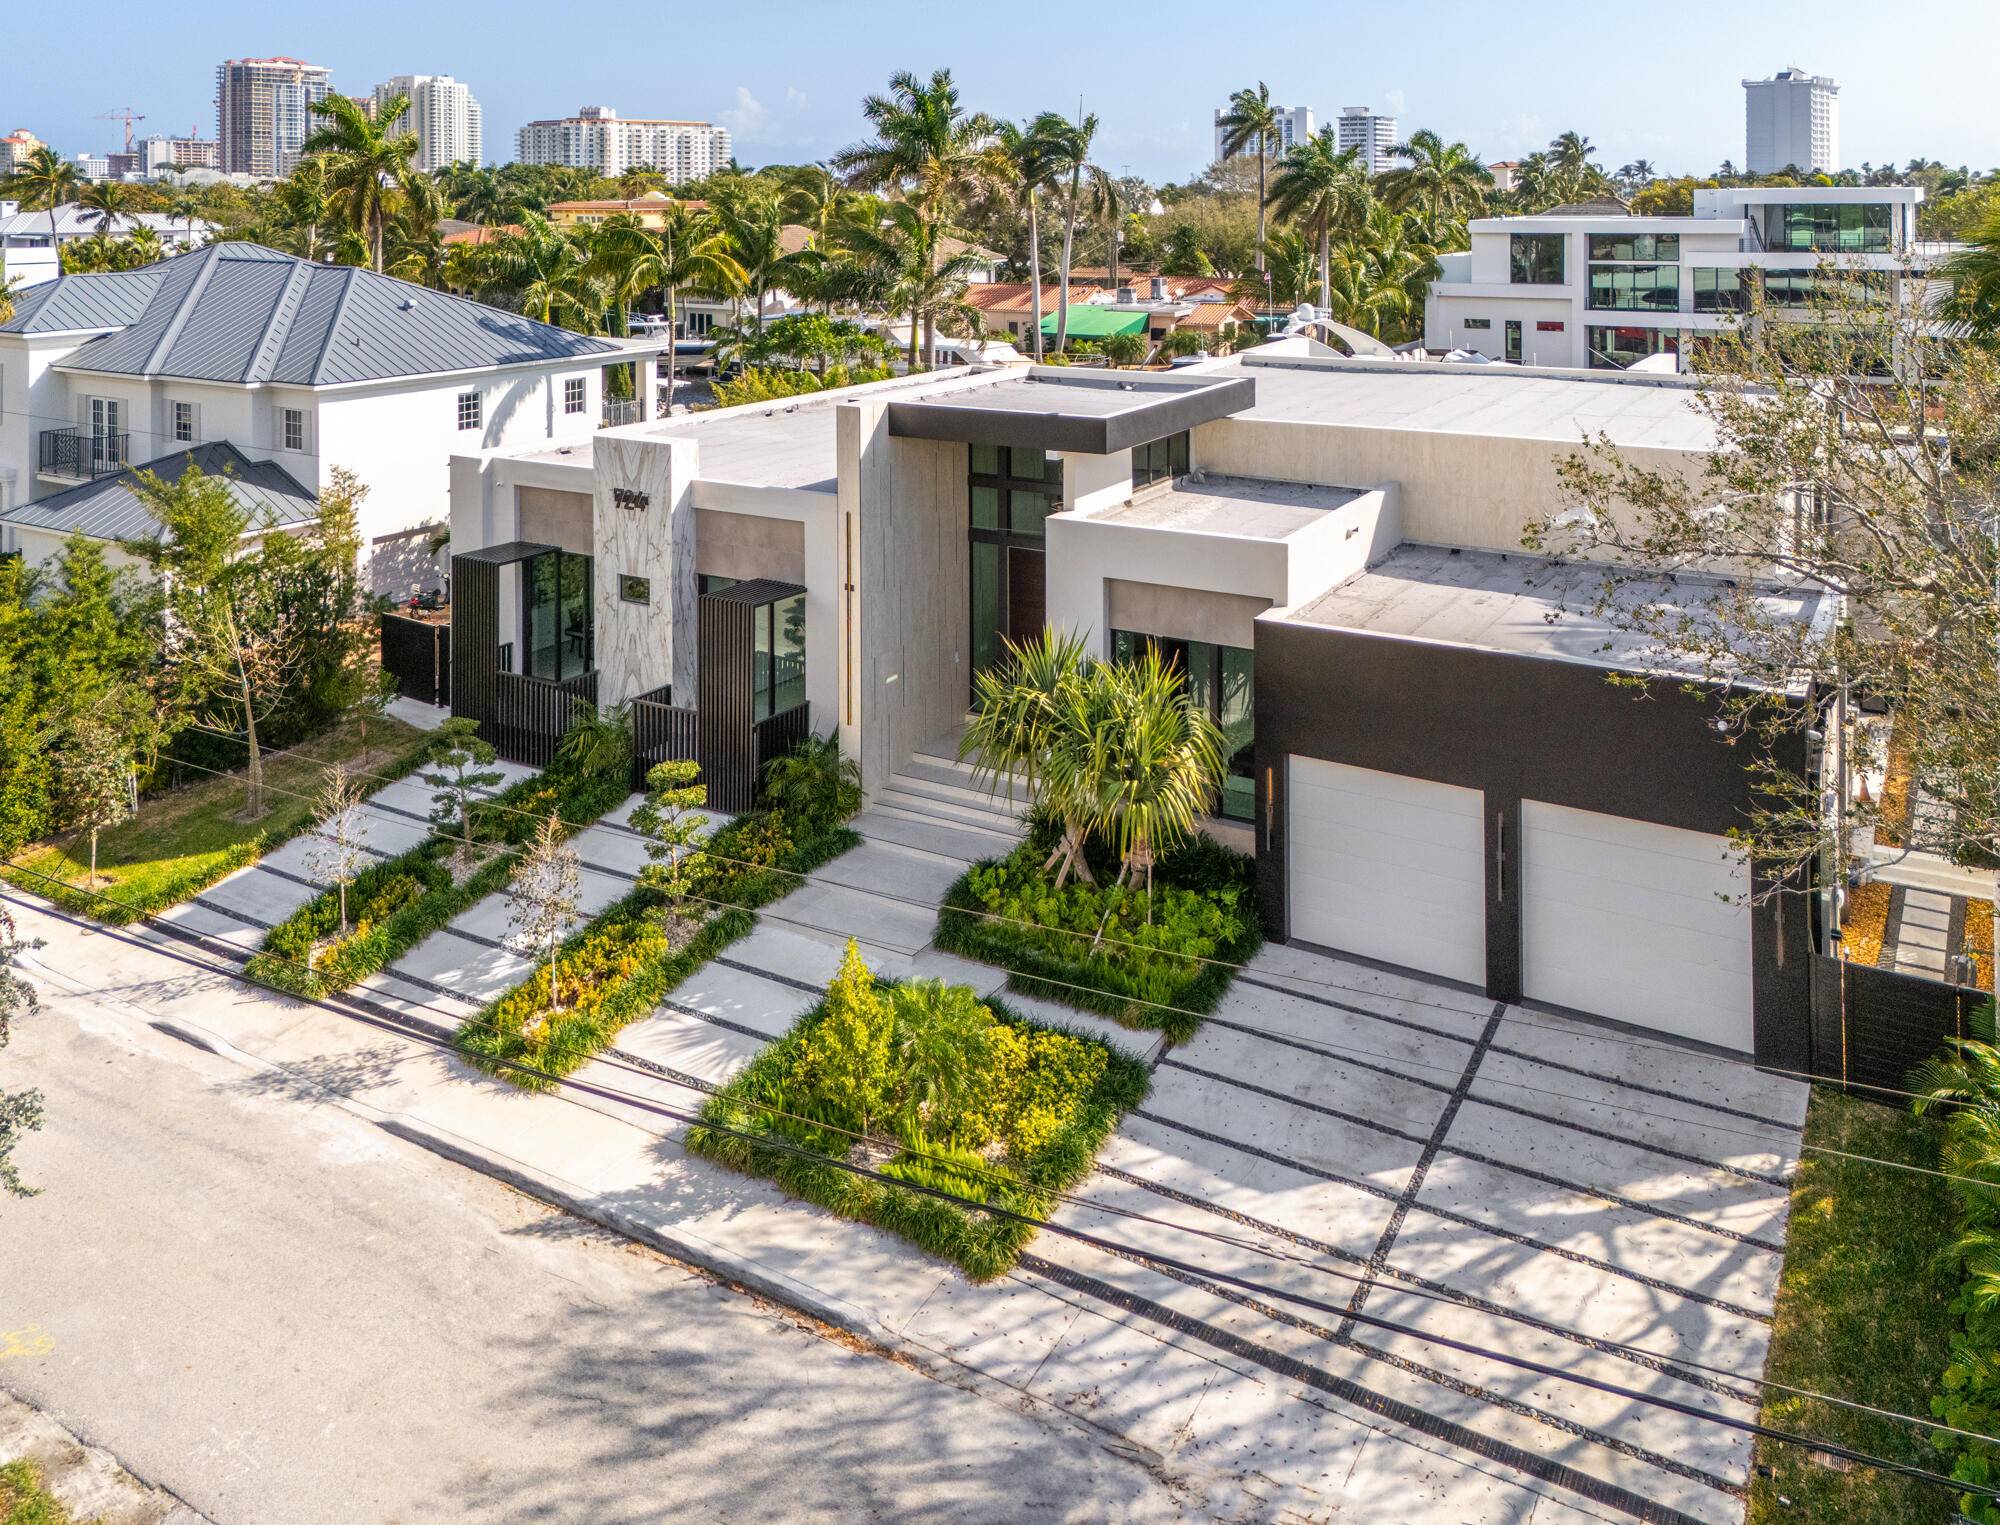 Experience unparalleled waterfront luxury living in the sought after Riviera Isles community of Fort Lauderdale, just moments from the vibrant Las Olas Boulevard.